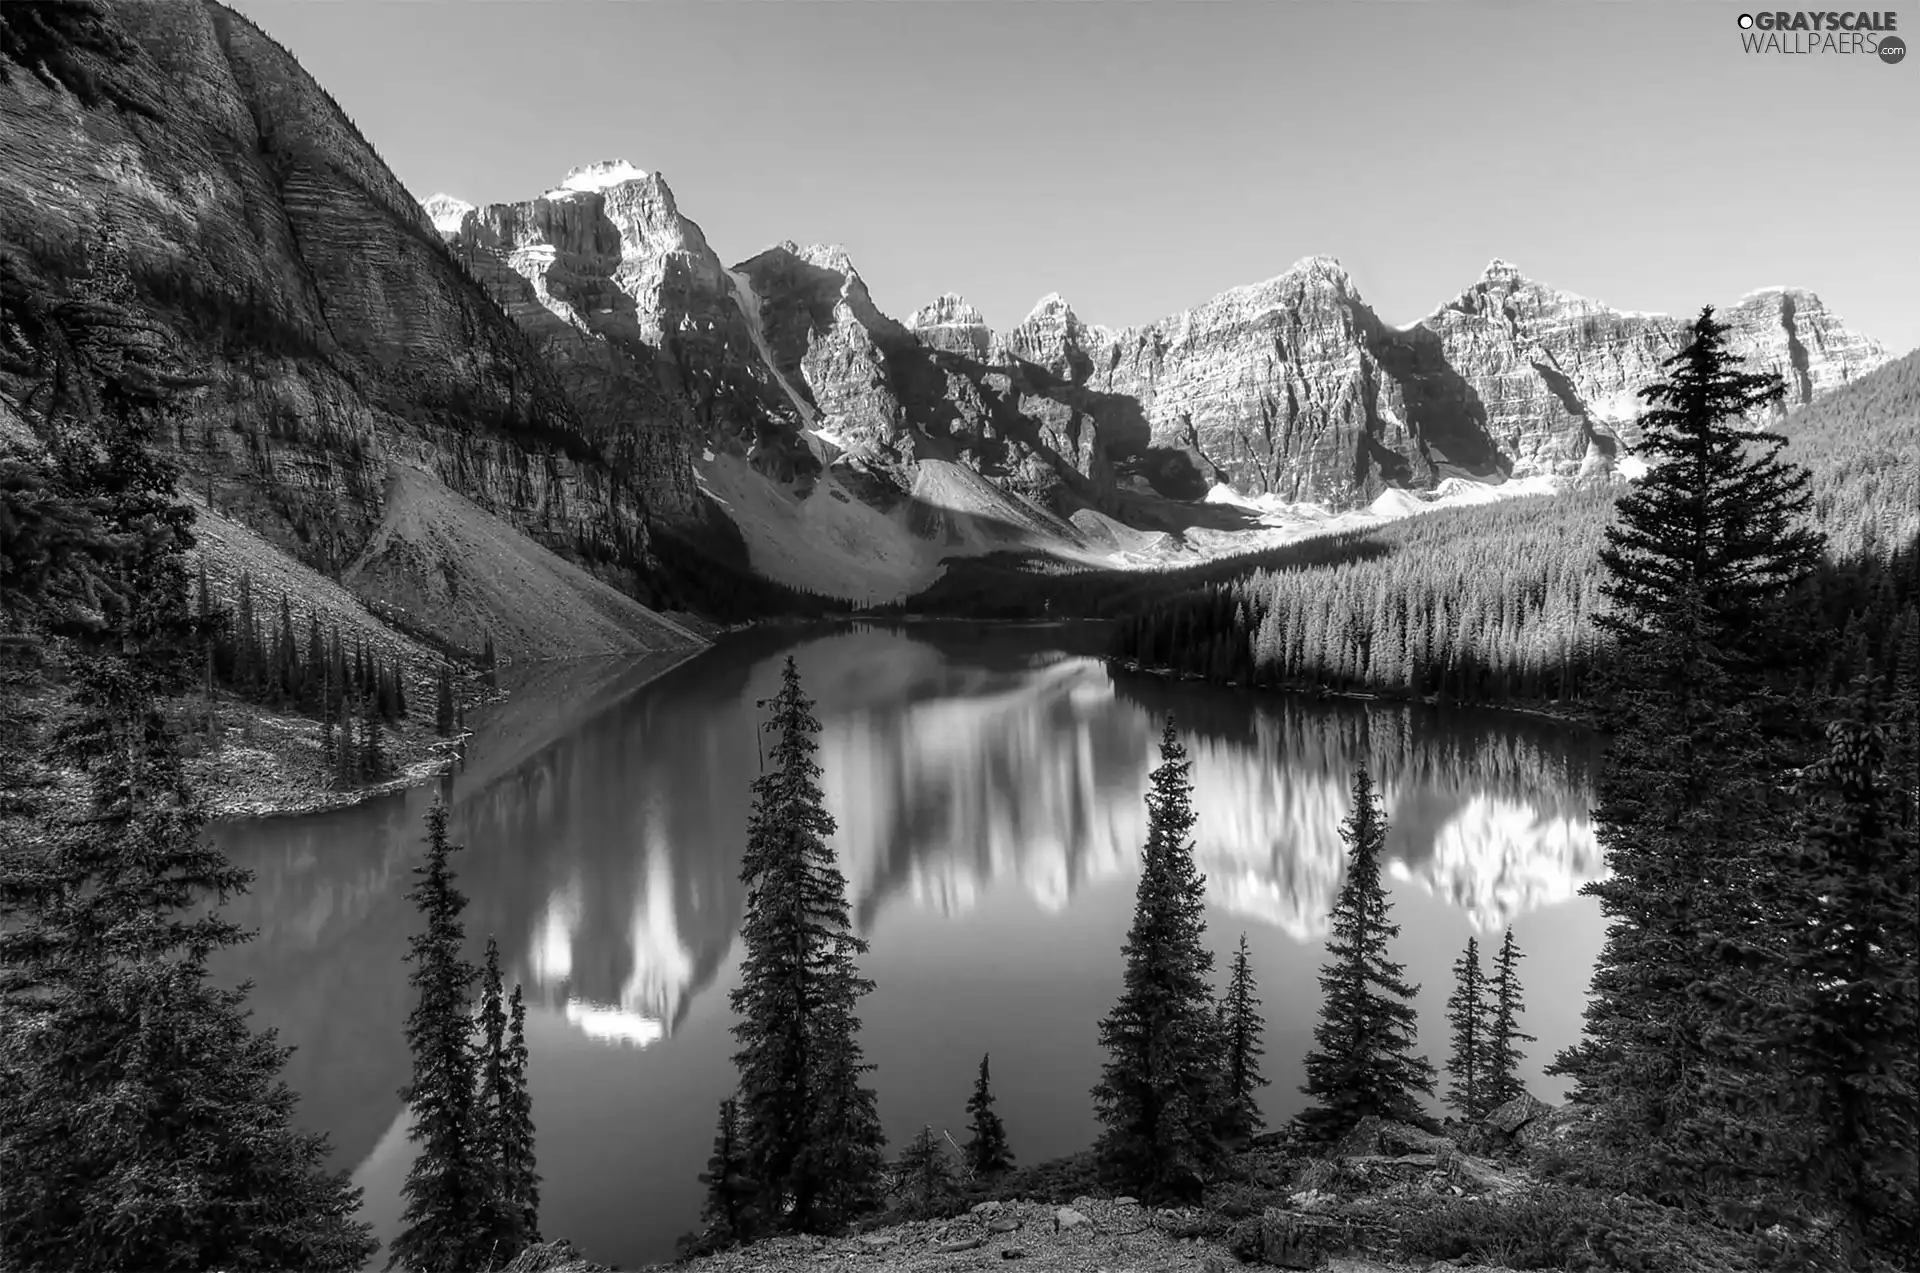 woods, Banff National Park, Spruces, Mountains, Canada, Lake Moraine, reflection